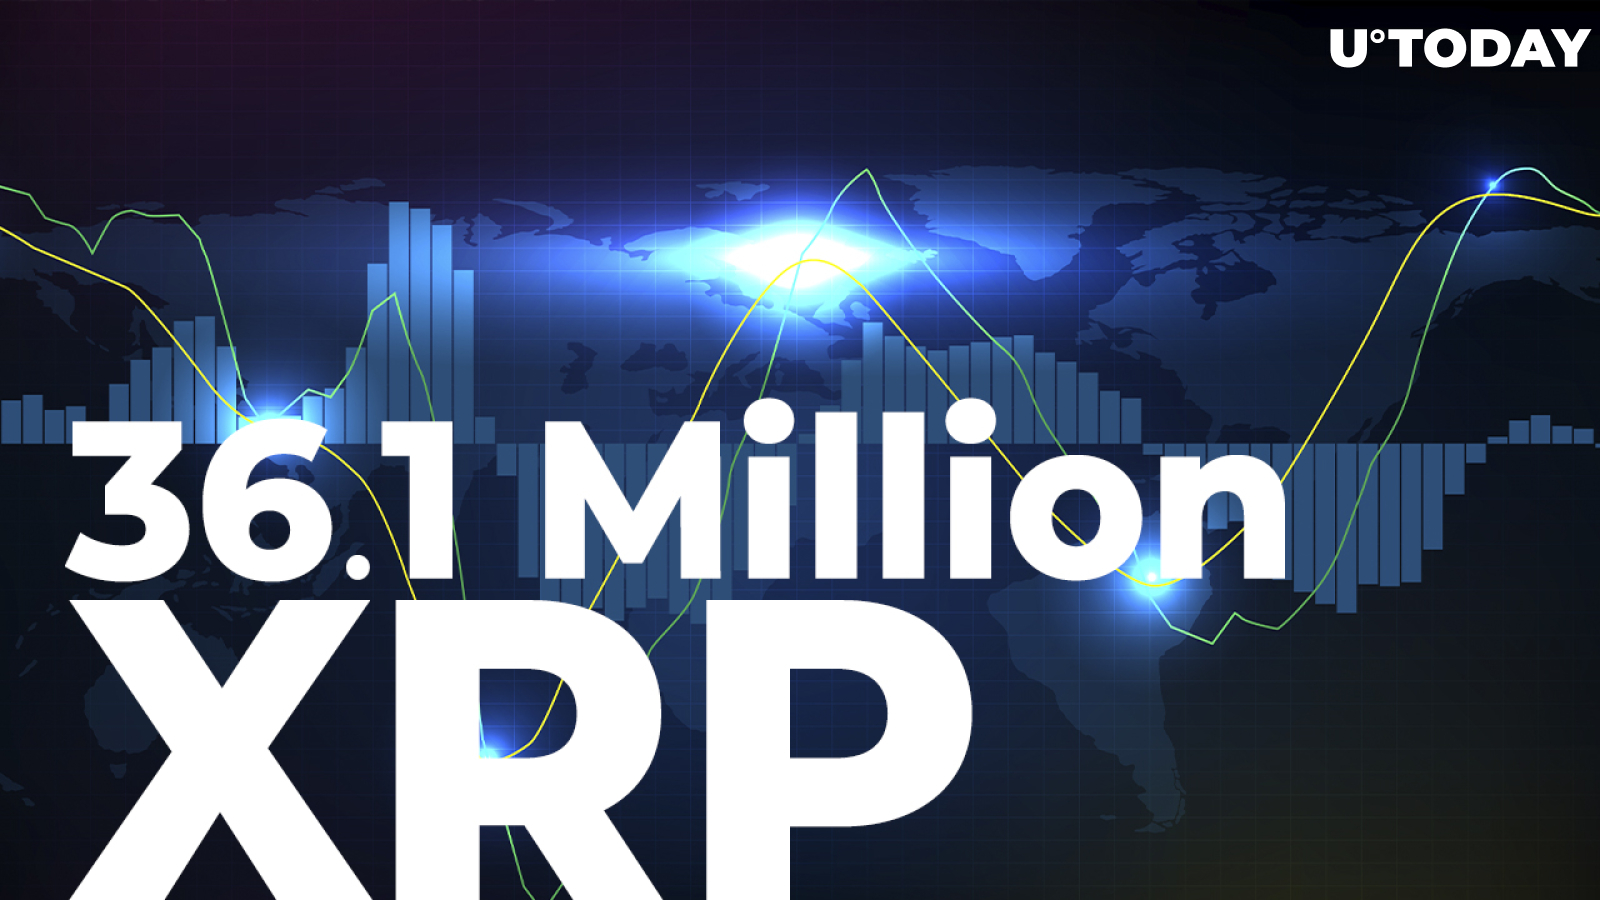 This Ripple’s Crypto Unicorn Shifts 36.1 Million XRP: Details